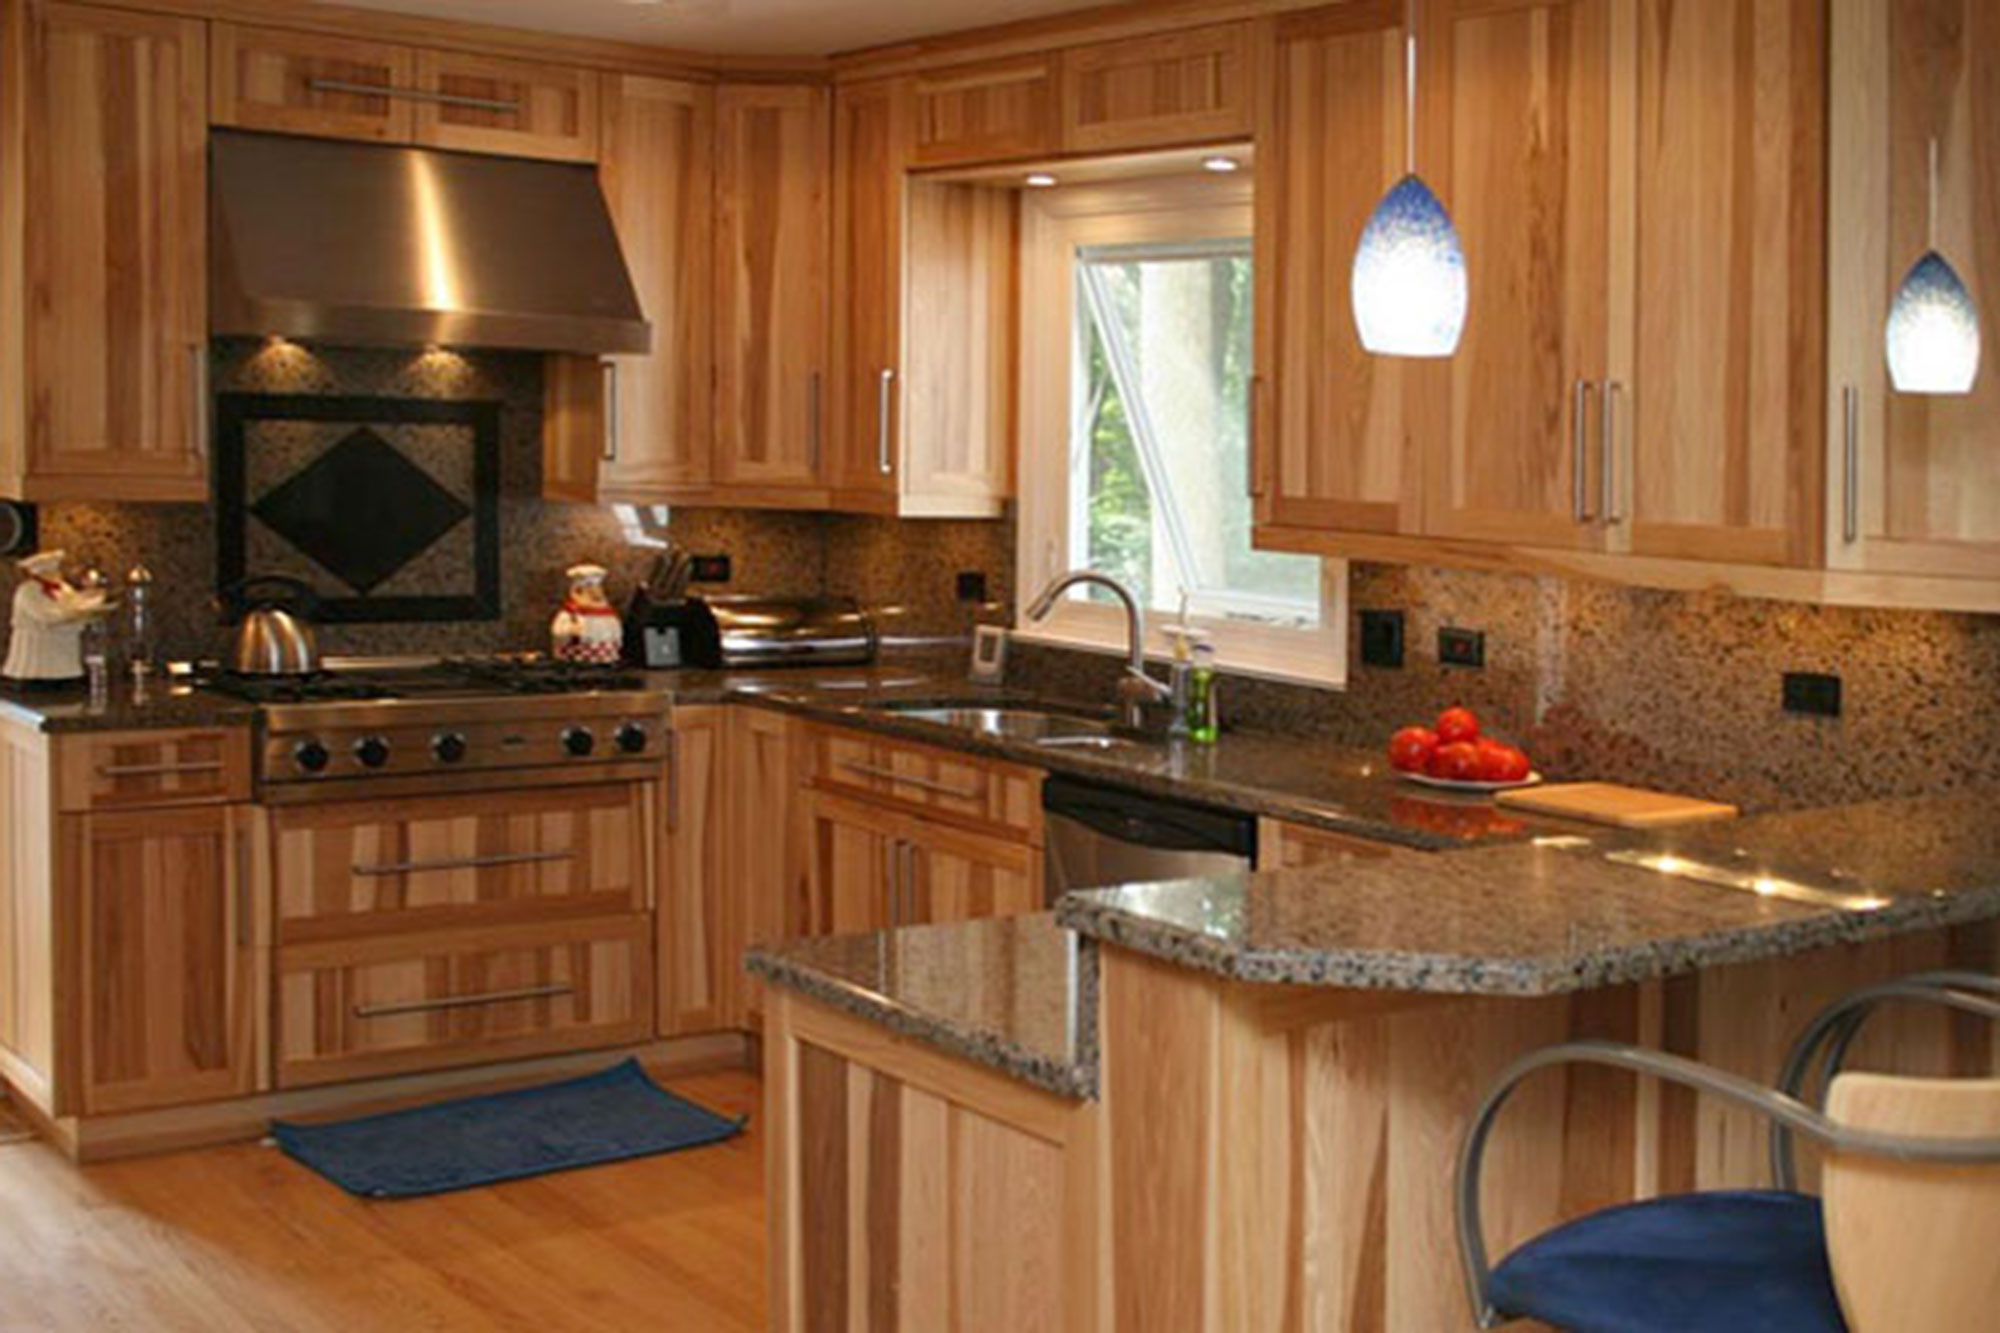 Gallery Kitchen And Bathroom Cabinets Kitchen Cabinets Bath Cabinets